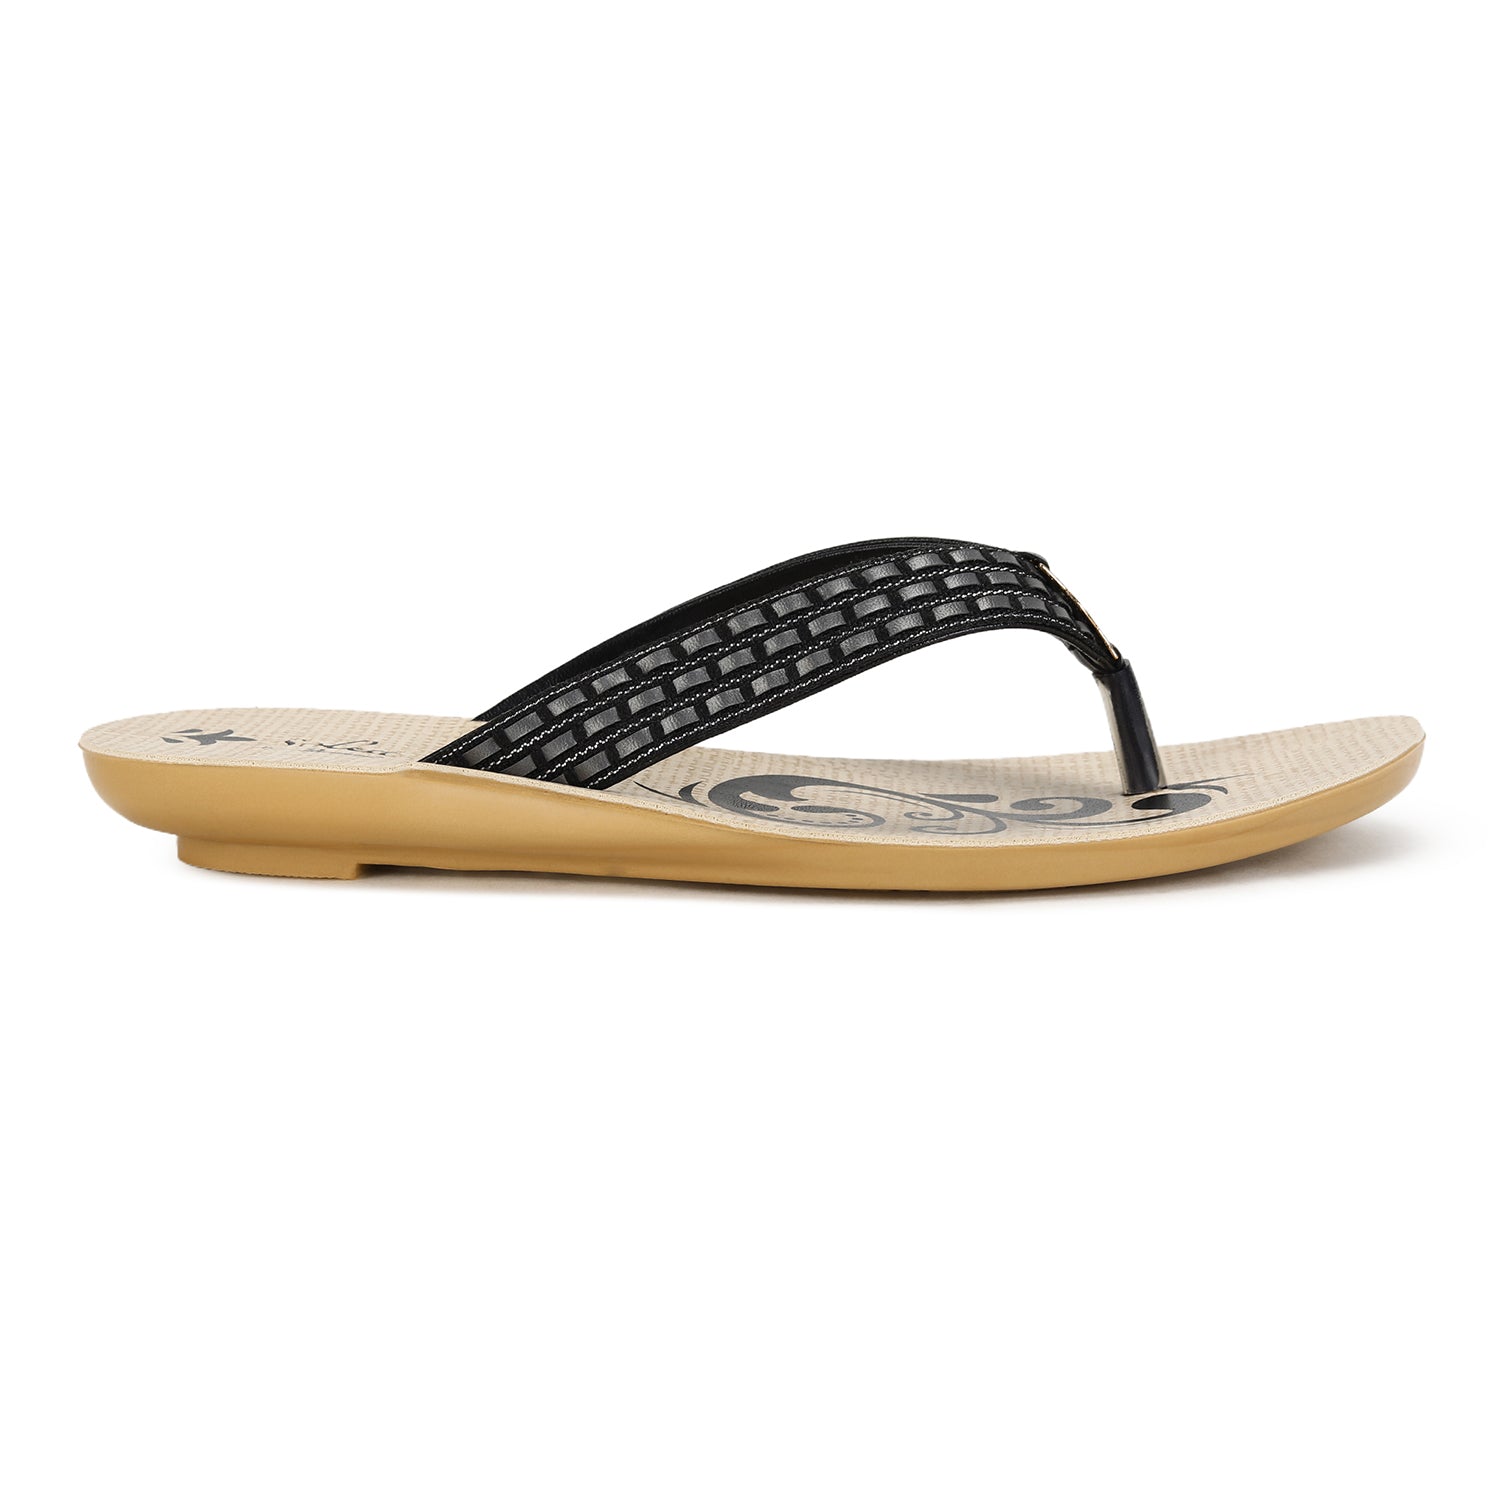 Paragon  PUK7007L Women Sandals | Casual &amp; Formal Sandals | Stylish, Comfortable &amp; Durable | For Daily &amp; Occasion Wear